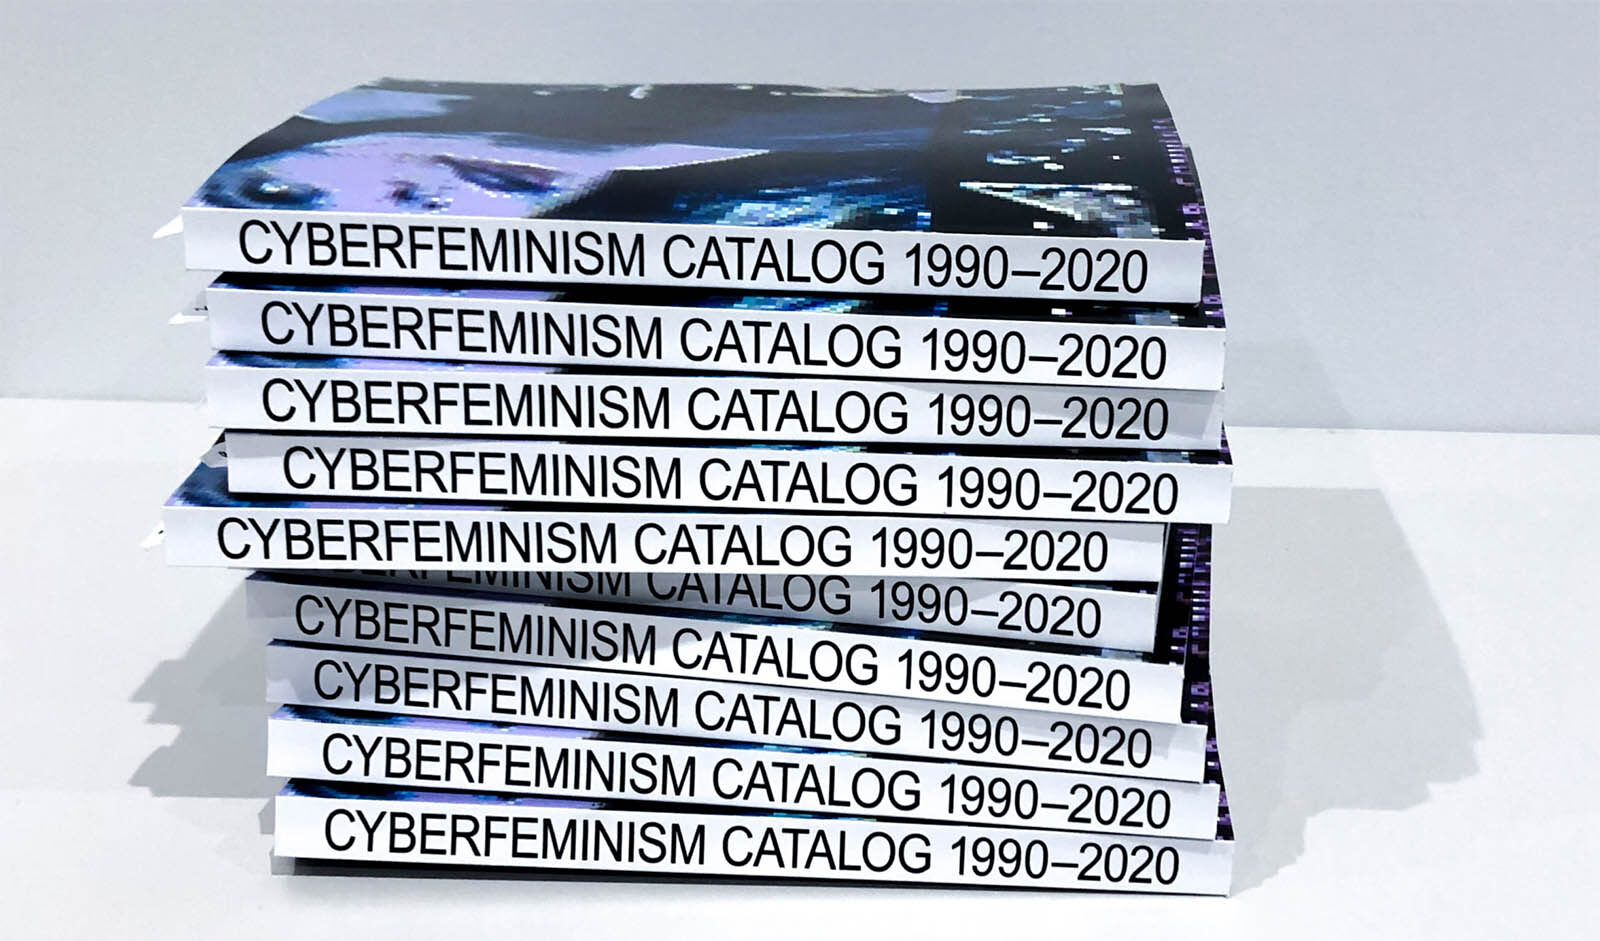 stack of books on a white table labelled 